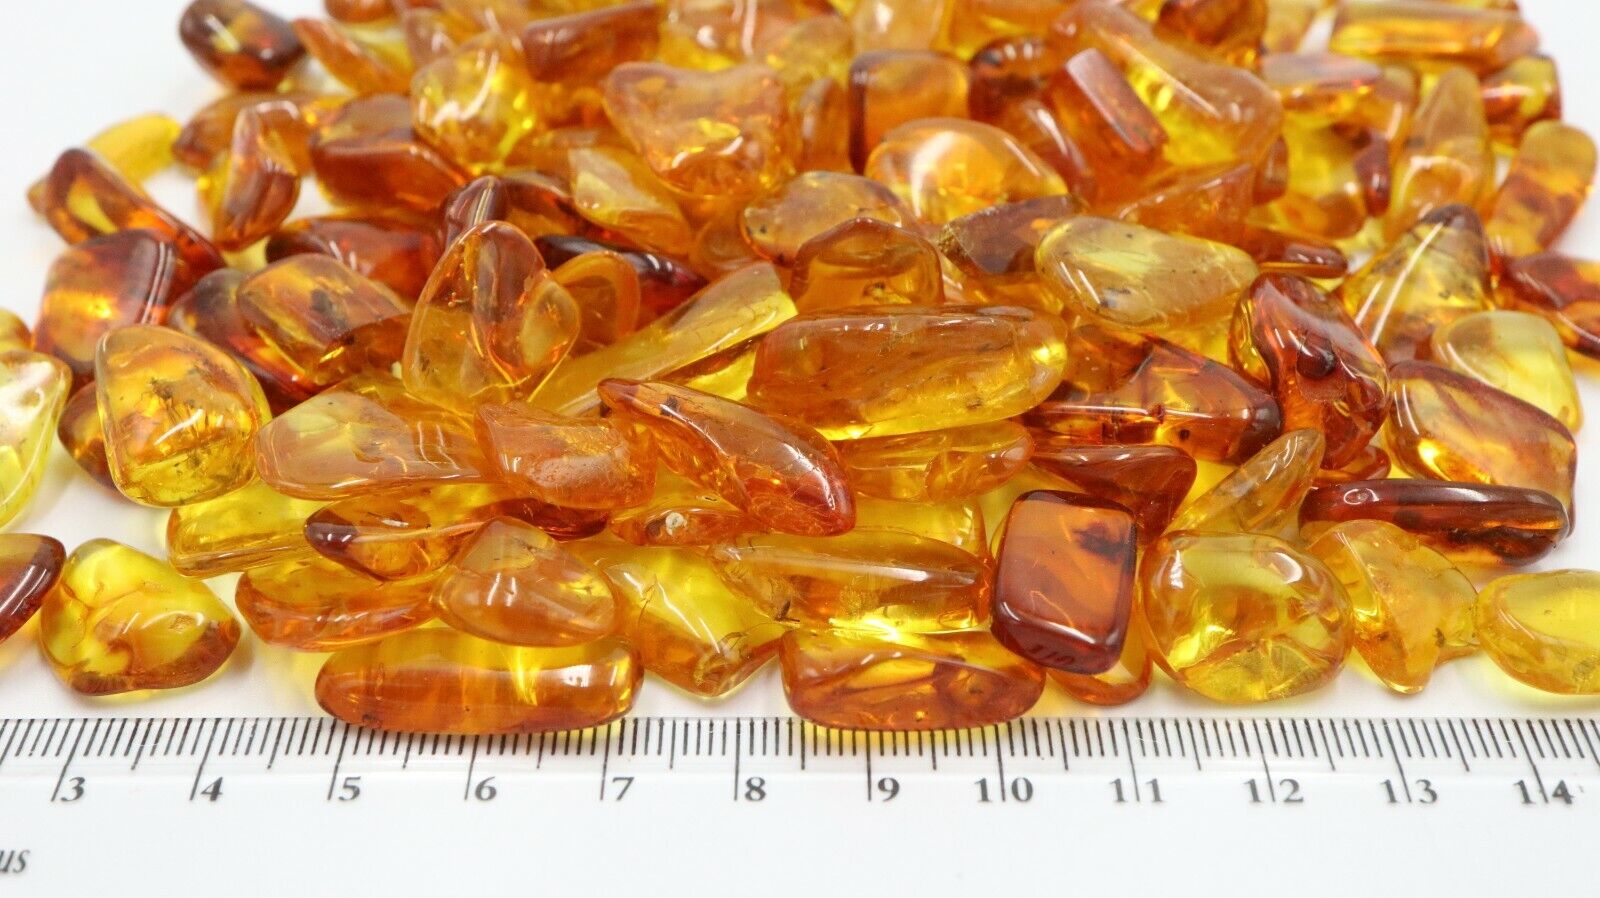 WHOLESALE 20 Baltic LARGER Amber Insects | Certified | Buy more with Discount amber-us